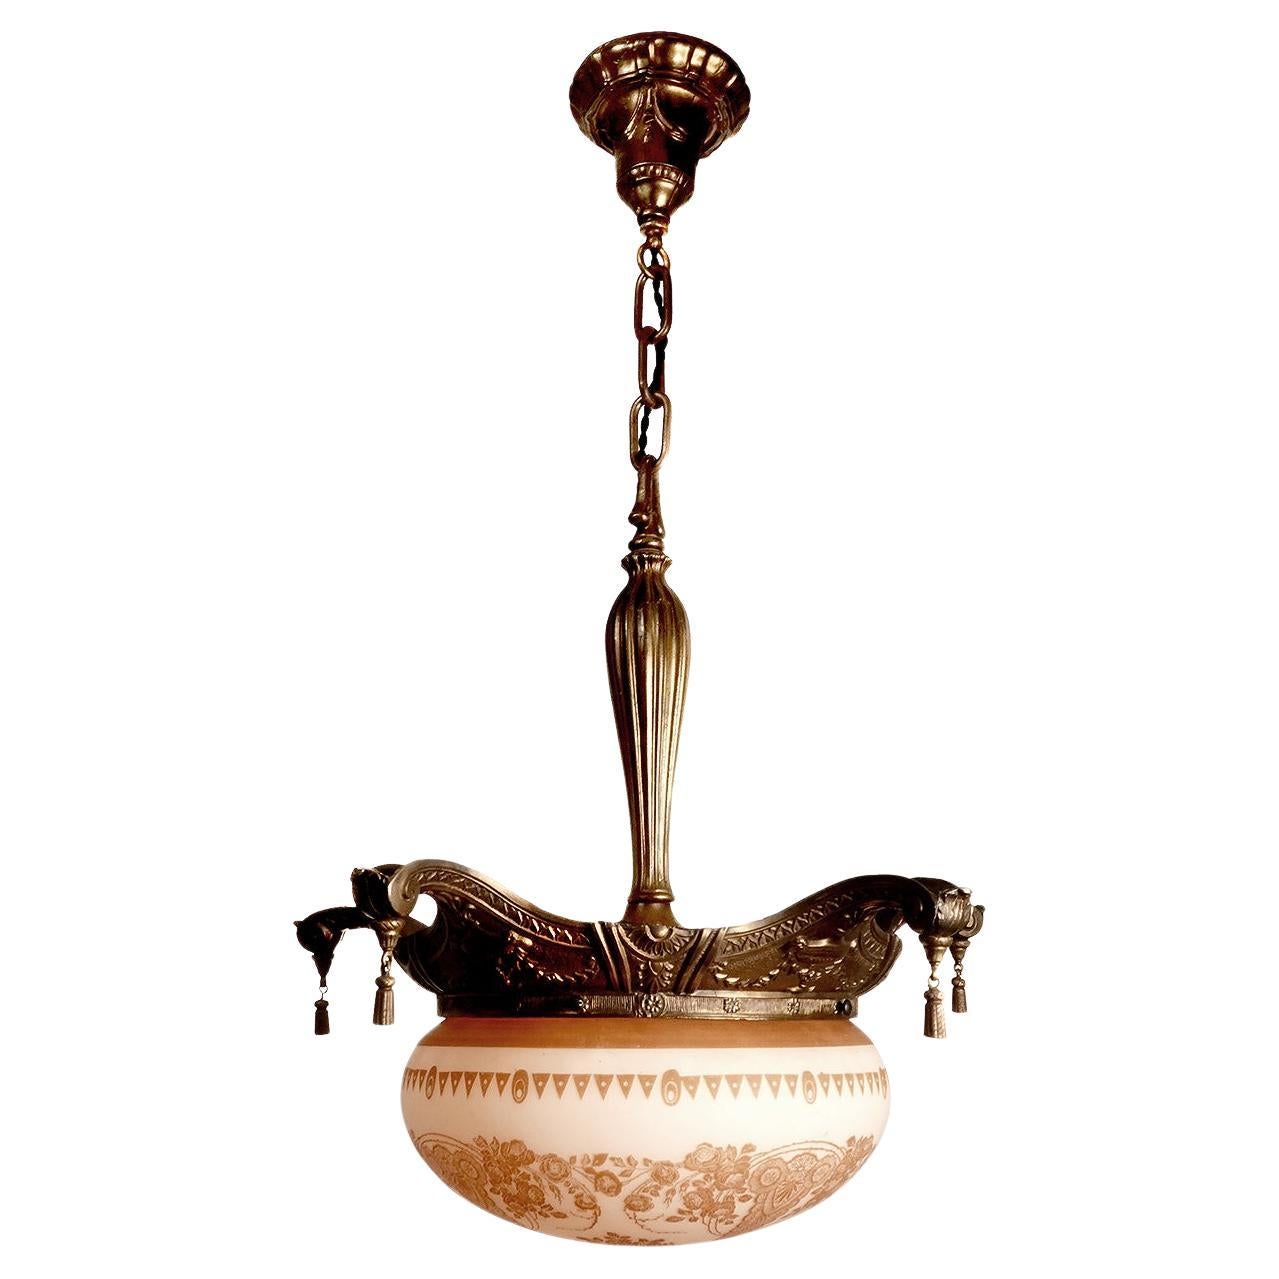 Ornate Pendent with Full Floral Stenciled Globe For Sale